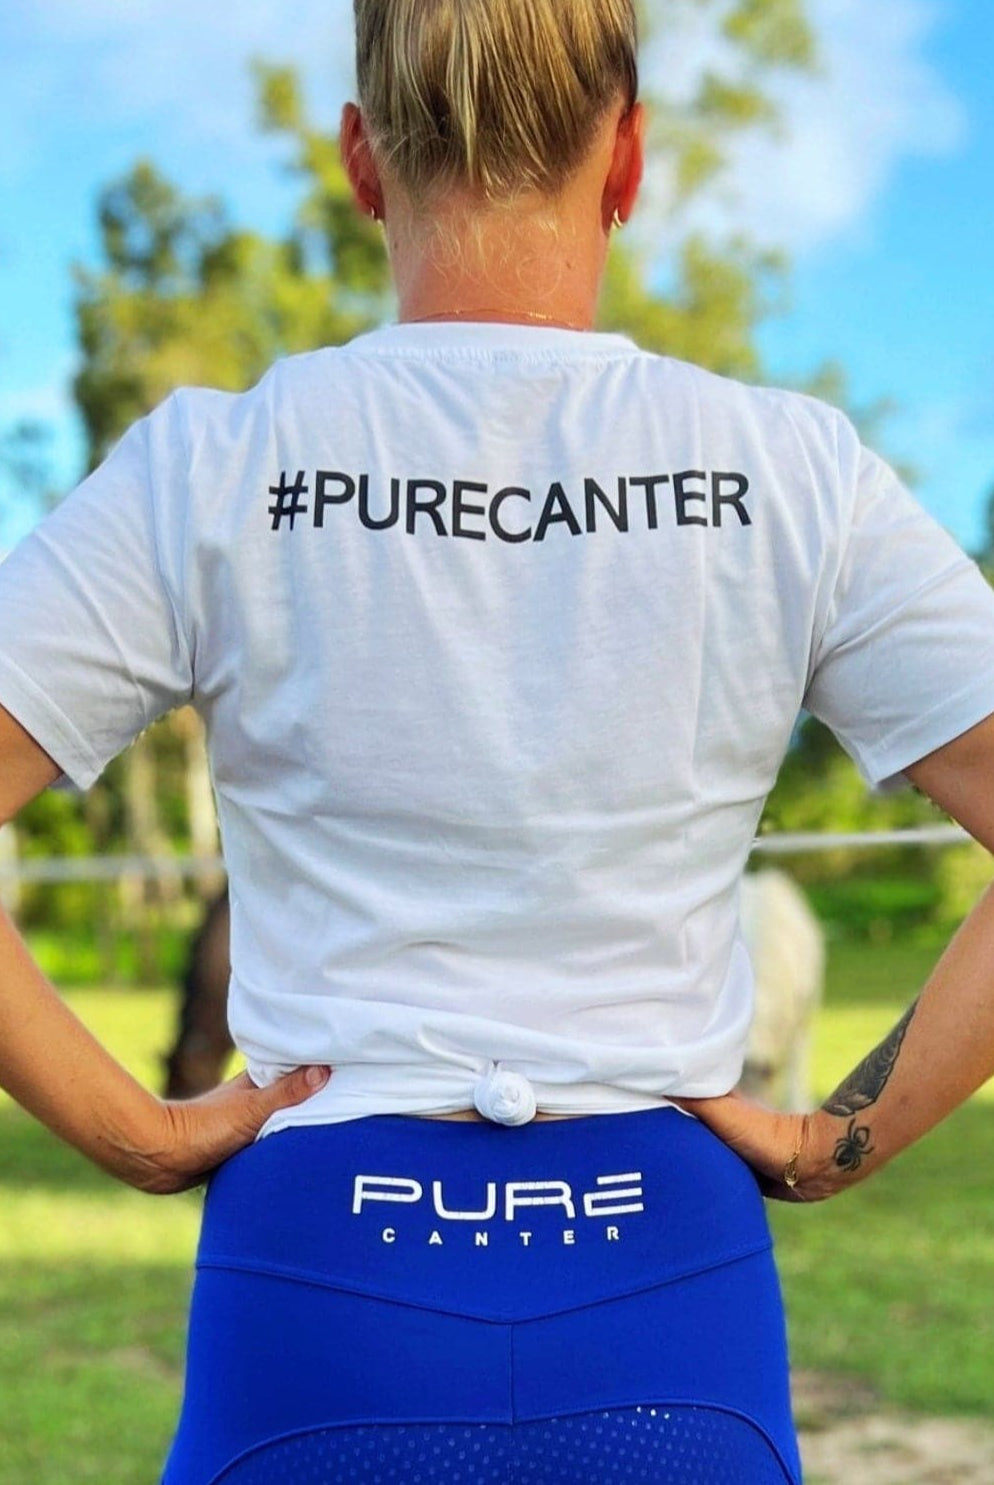 A person stands outdoors with their back to the camera, hands on hips. They sport a white Youth PURE Emblem Shirt by Pure Canter with the hashtag "#PURECANTER" and blue leggings featuring "PURE" on the waistband—true wardrobe staples. Lush green trees and a clear blue sky form the backdrop.